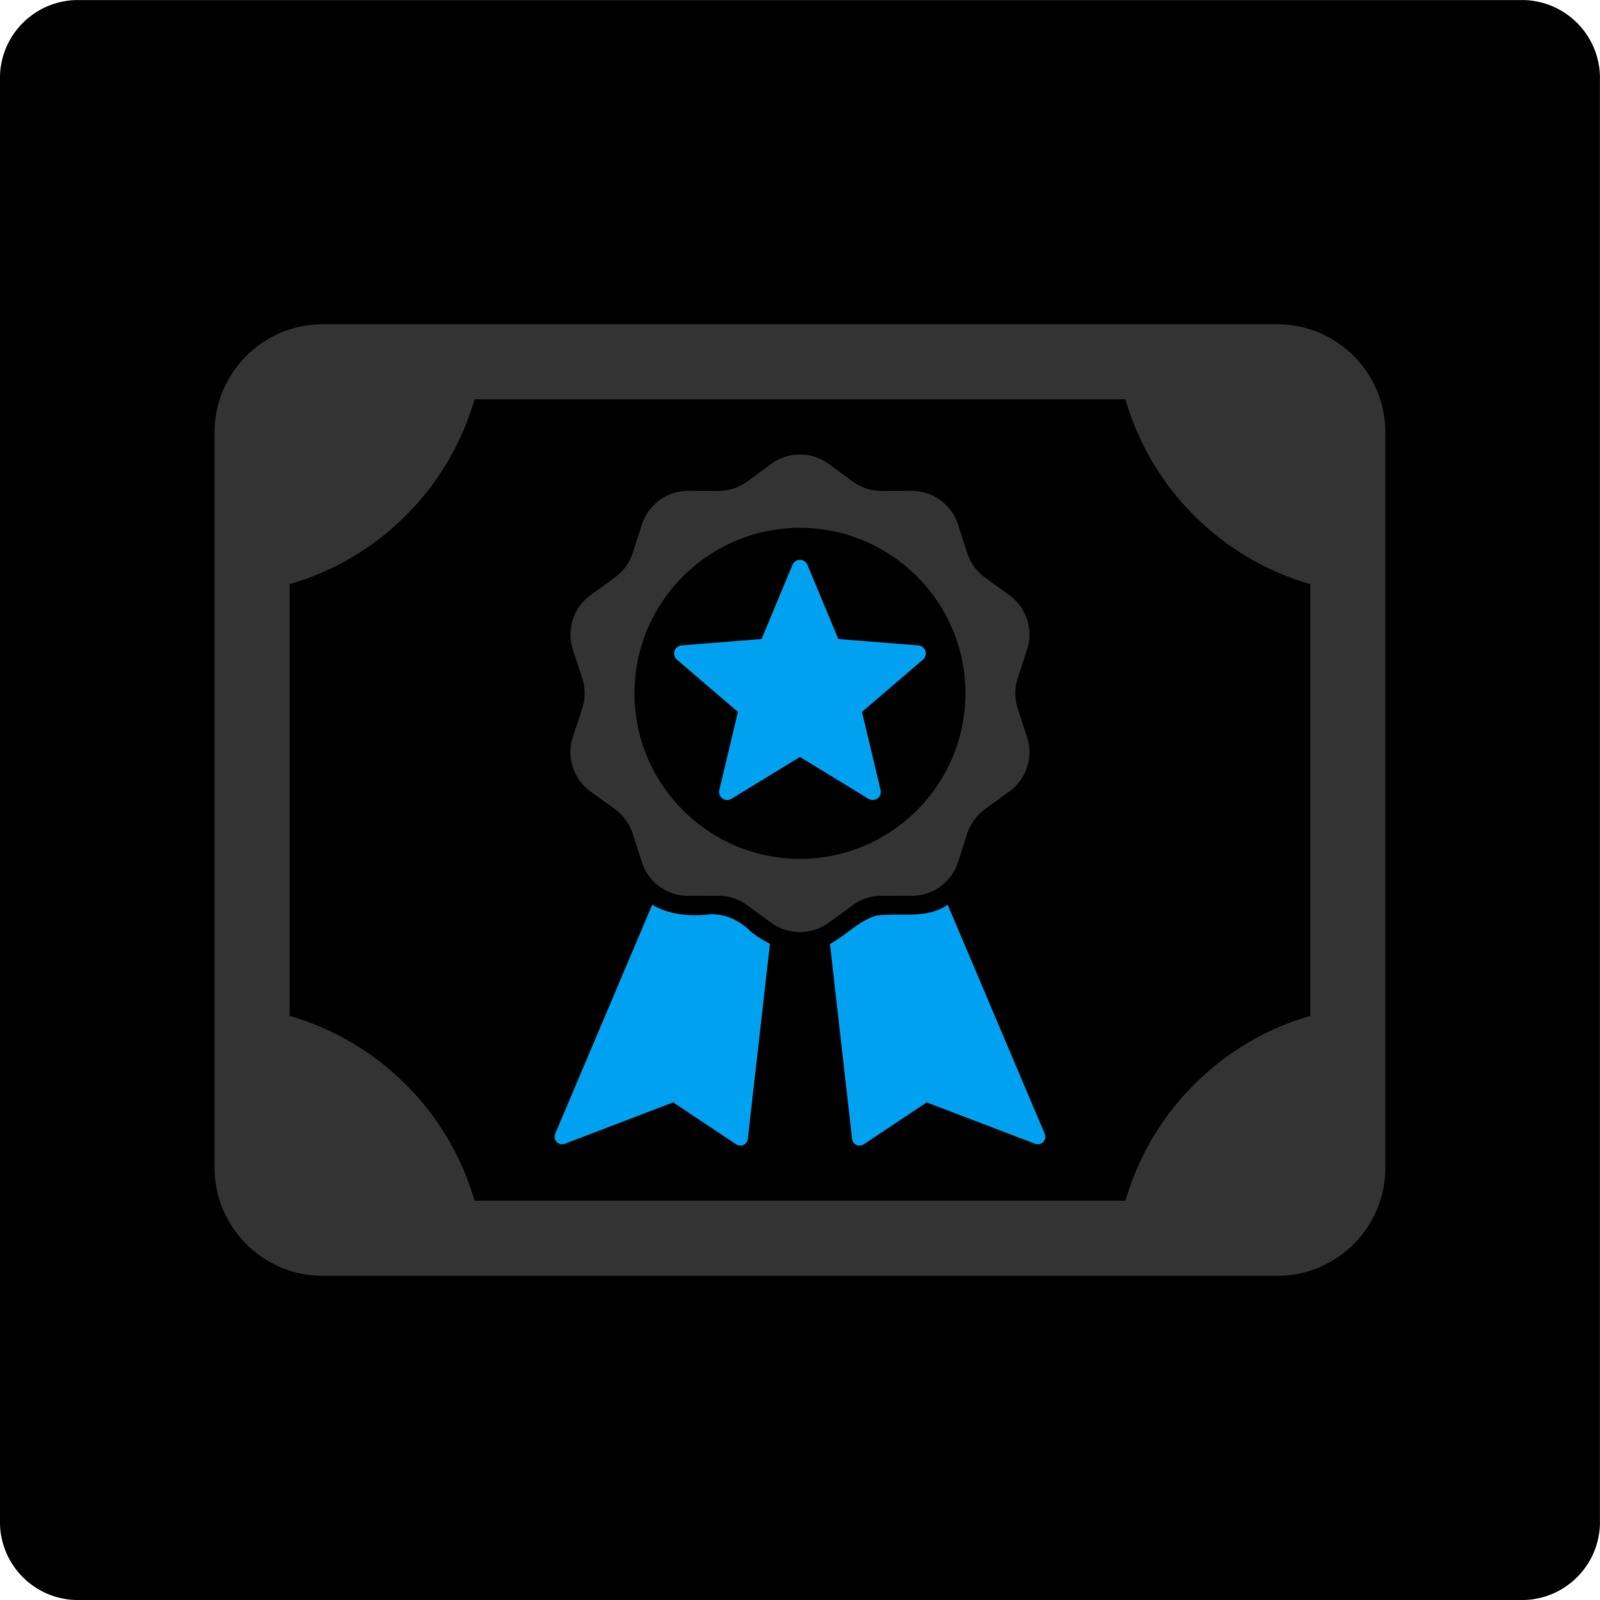 Certificate icon. Vector style is bicolor flat symbol, gray and light blue colors, black rounded square button, white background.